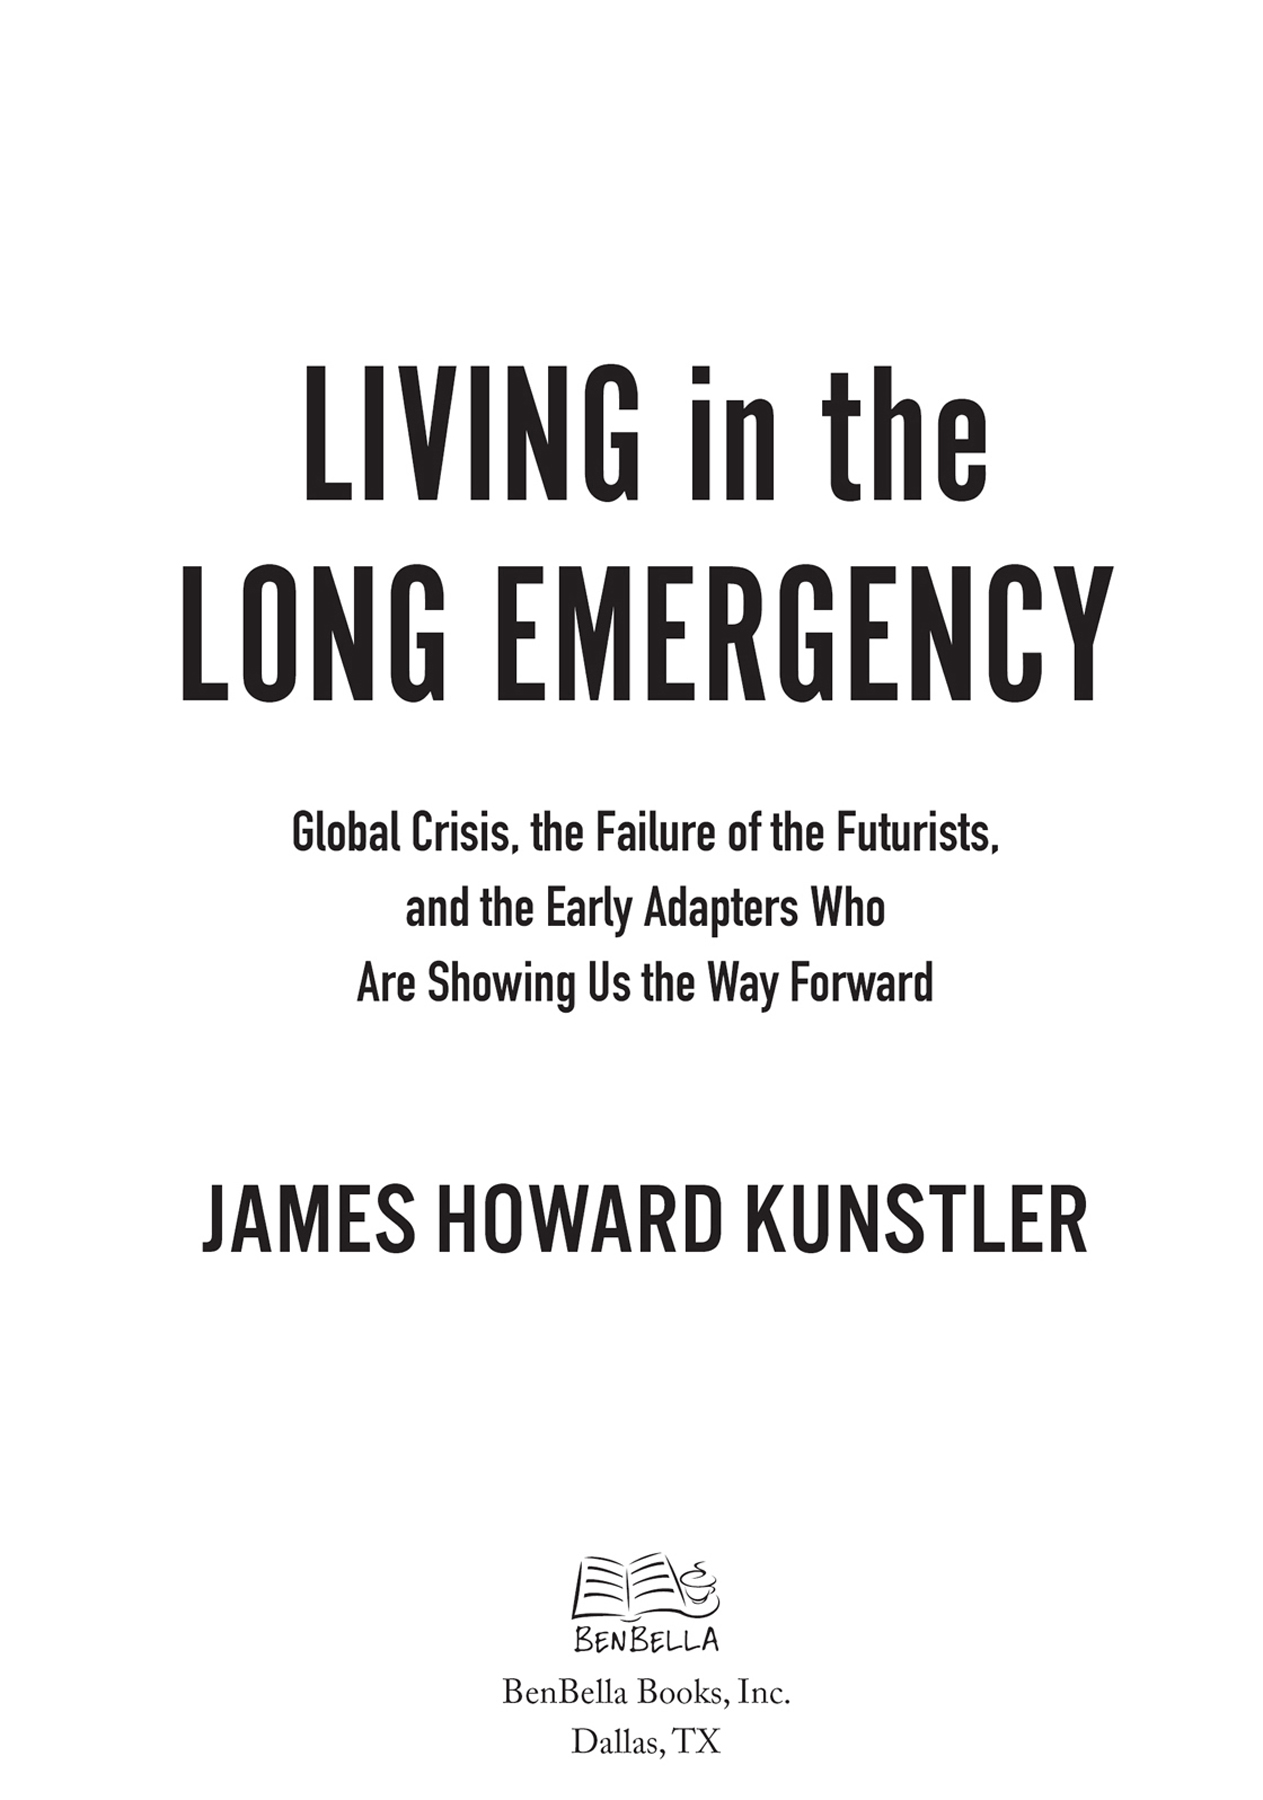 Living in the Long Emergency copyright 2020 by James Howard Kunstler All rights - photo 3